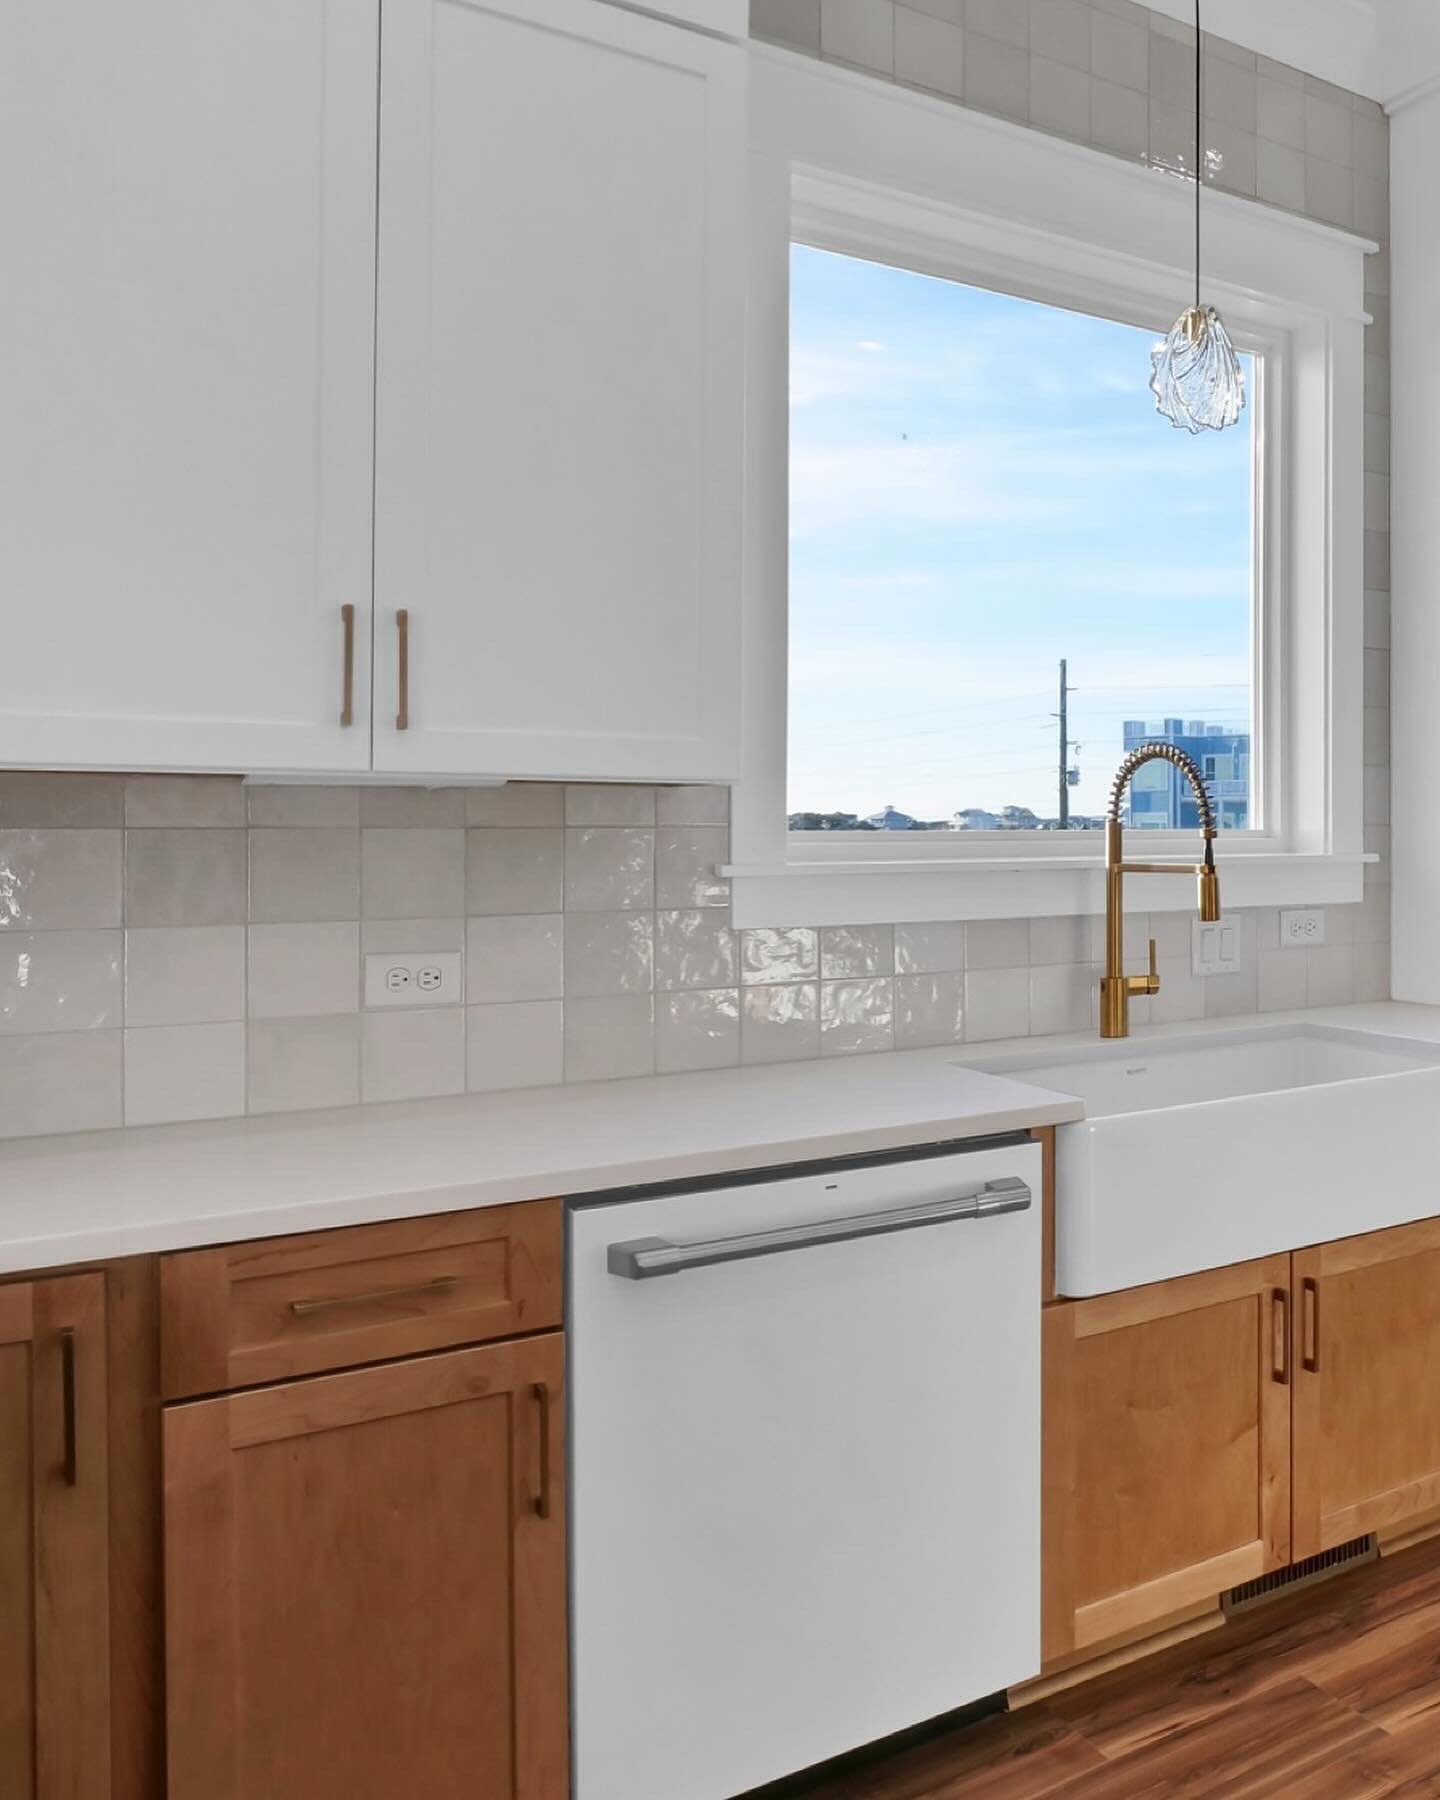 Swipe to see the stunning white appliances that give this beach house kitchen the perfect finishing touch. 🤩

Cabinetry: @waypointlivingspaces in Painted Linen and Maple Rye

#cabinetry #kitchendesign #kitcheninspo #interiors #kitchencabinets